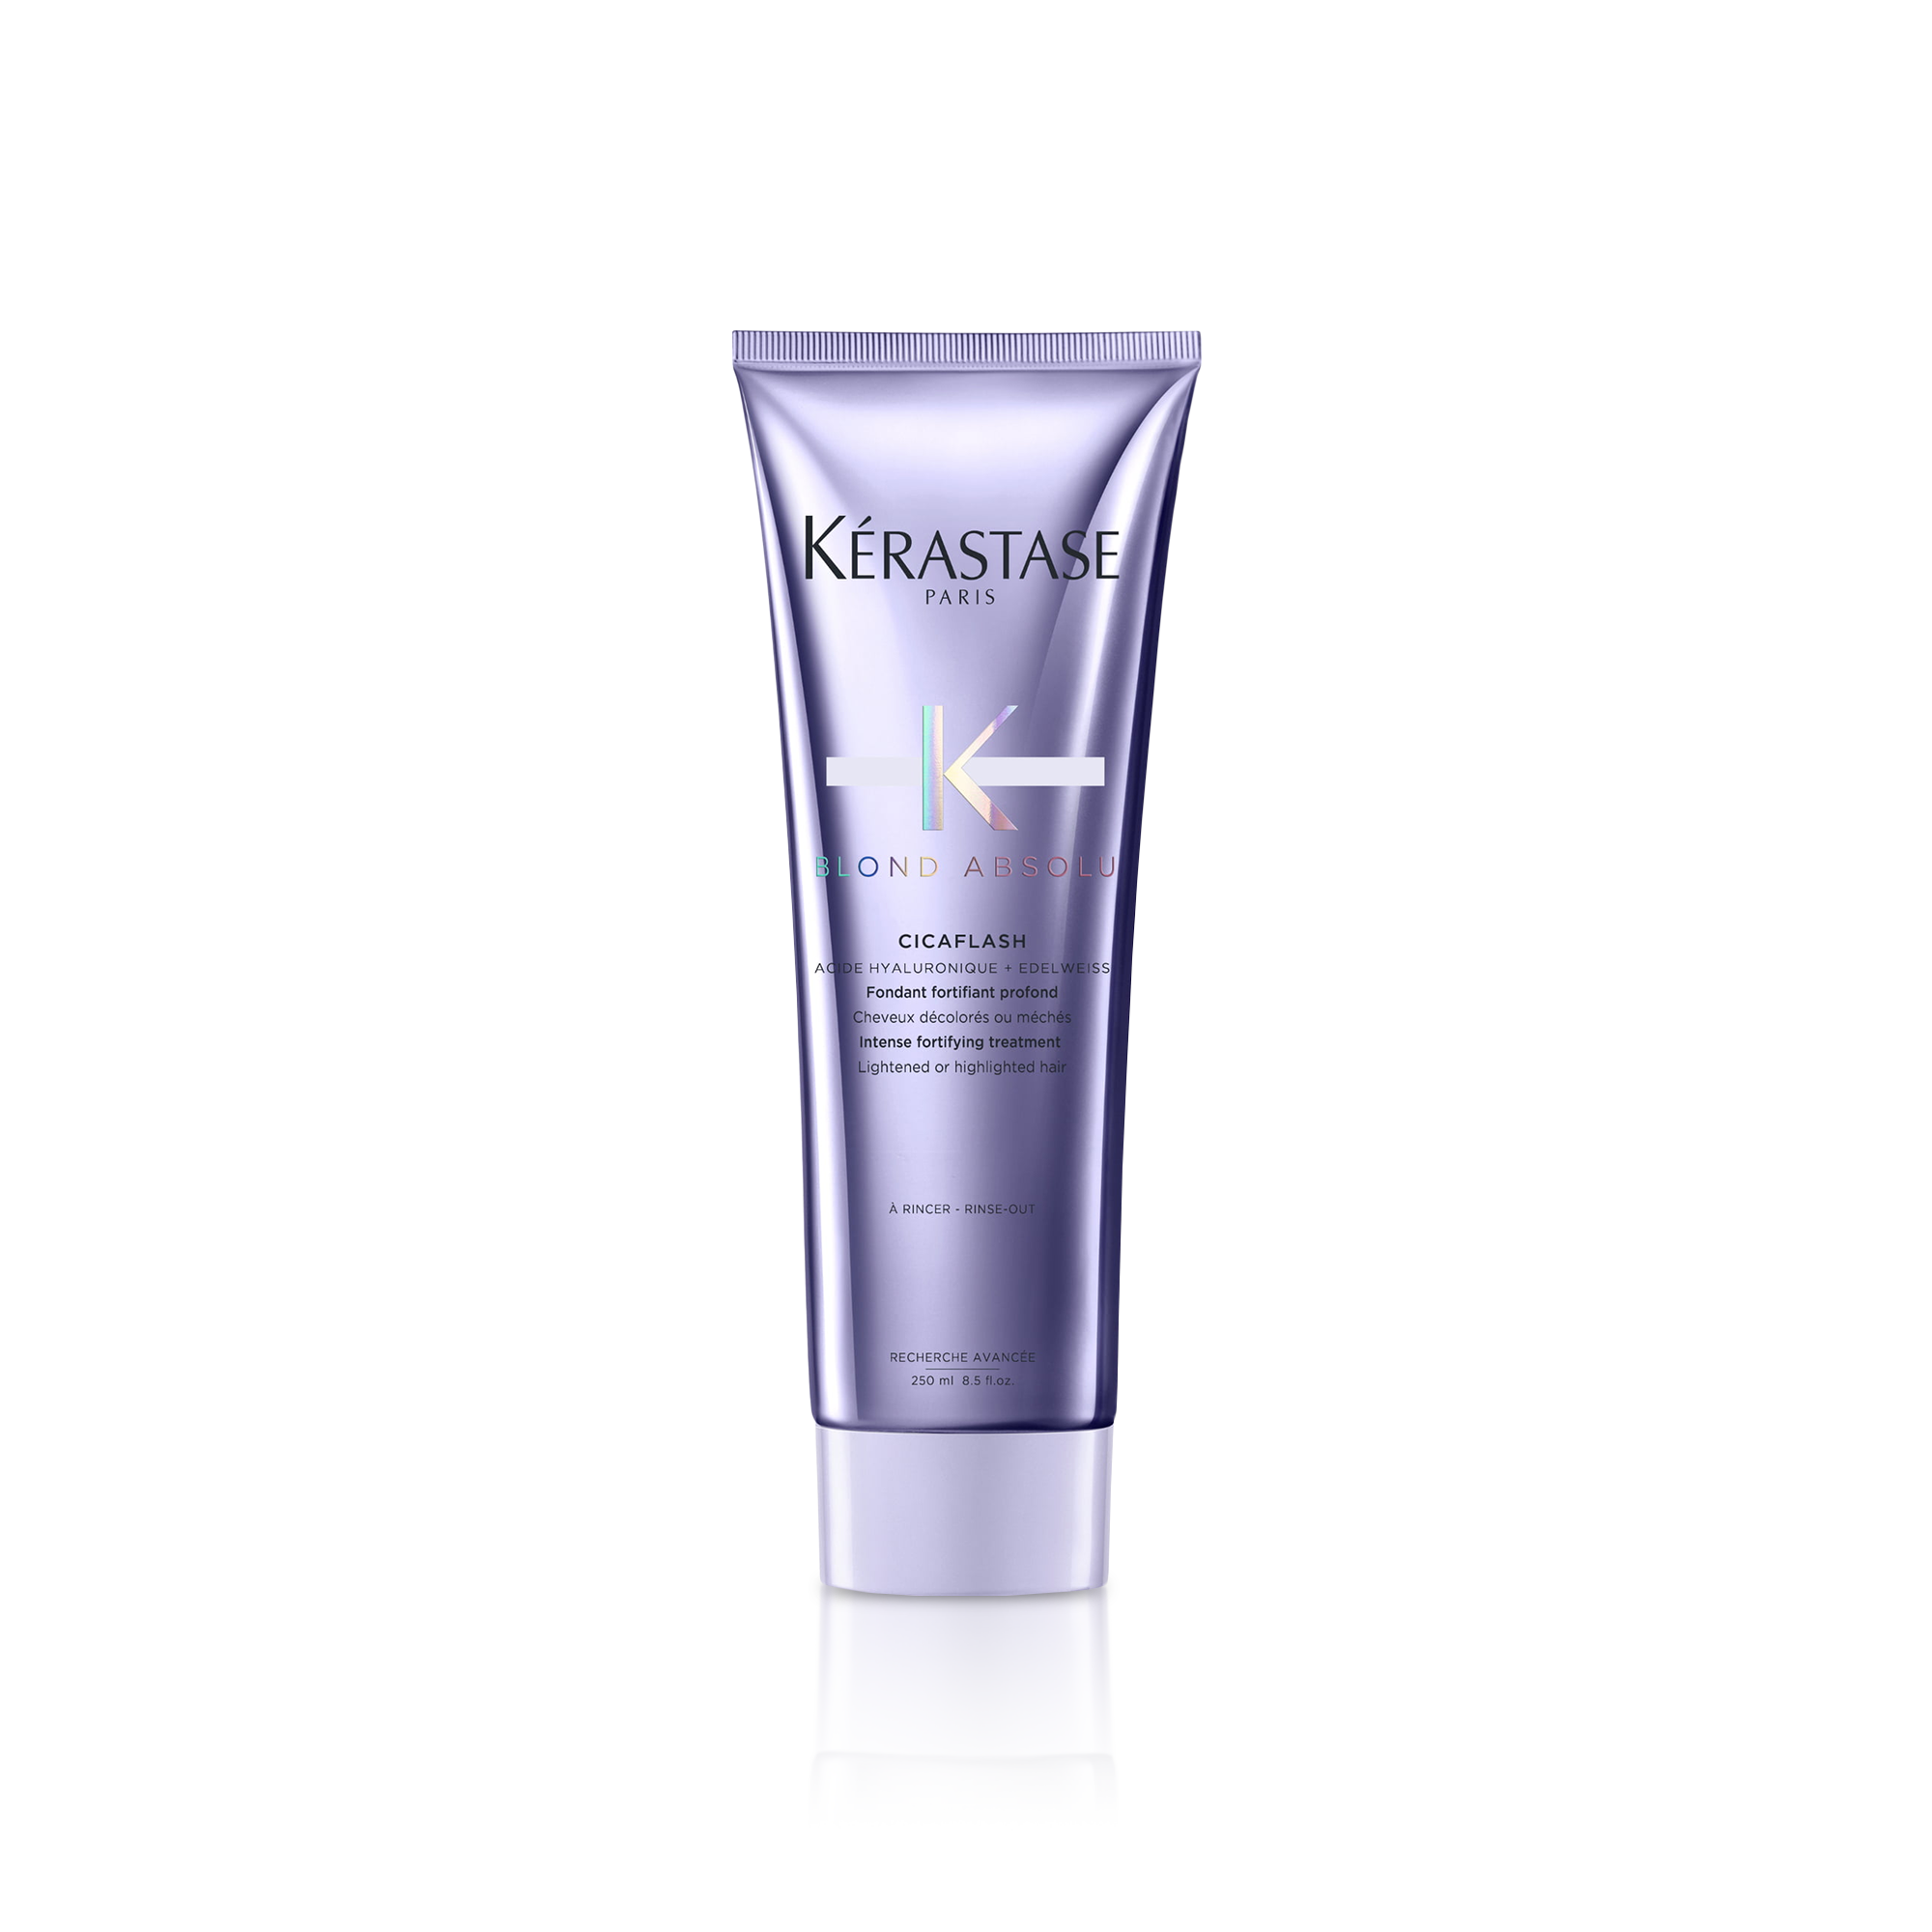 Blond Absolu Cicaflash Intense Fortifying Treatment